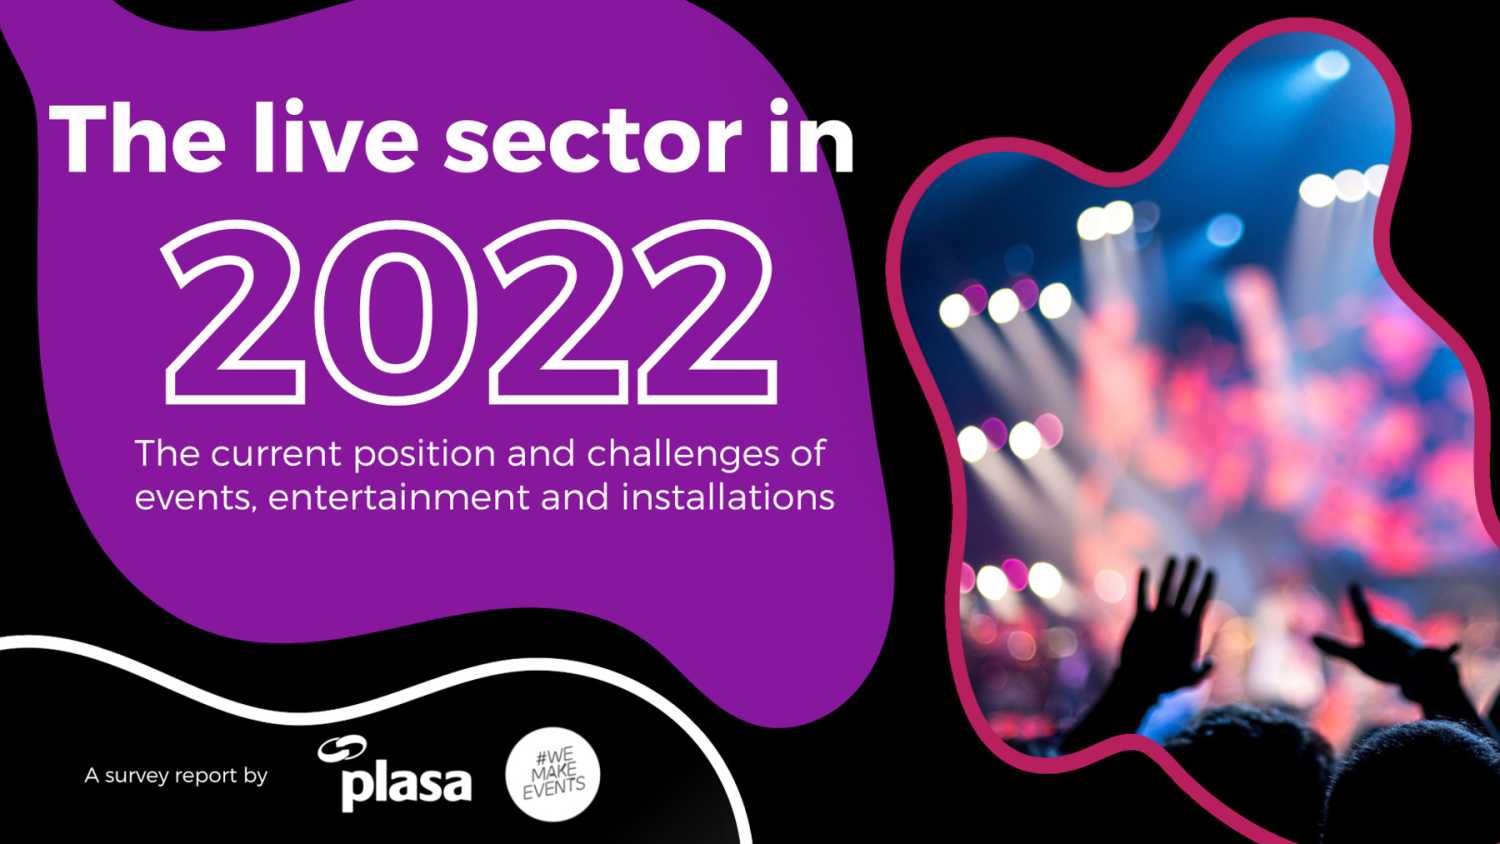 The data offers clear insights into how the events, entertainment and installation industries are recovering